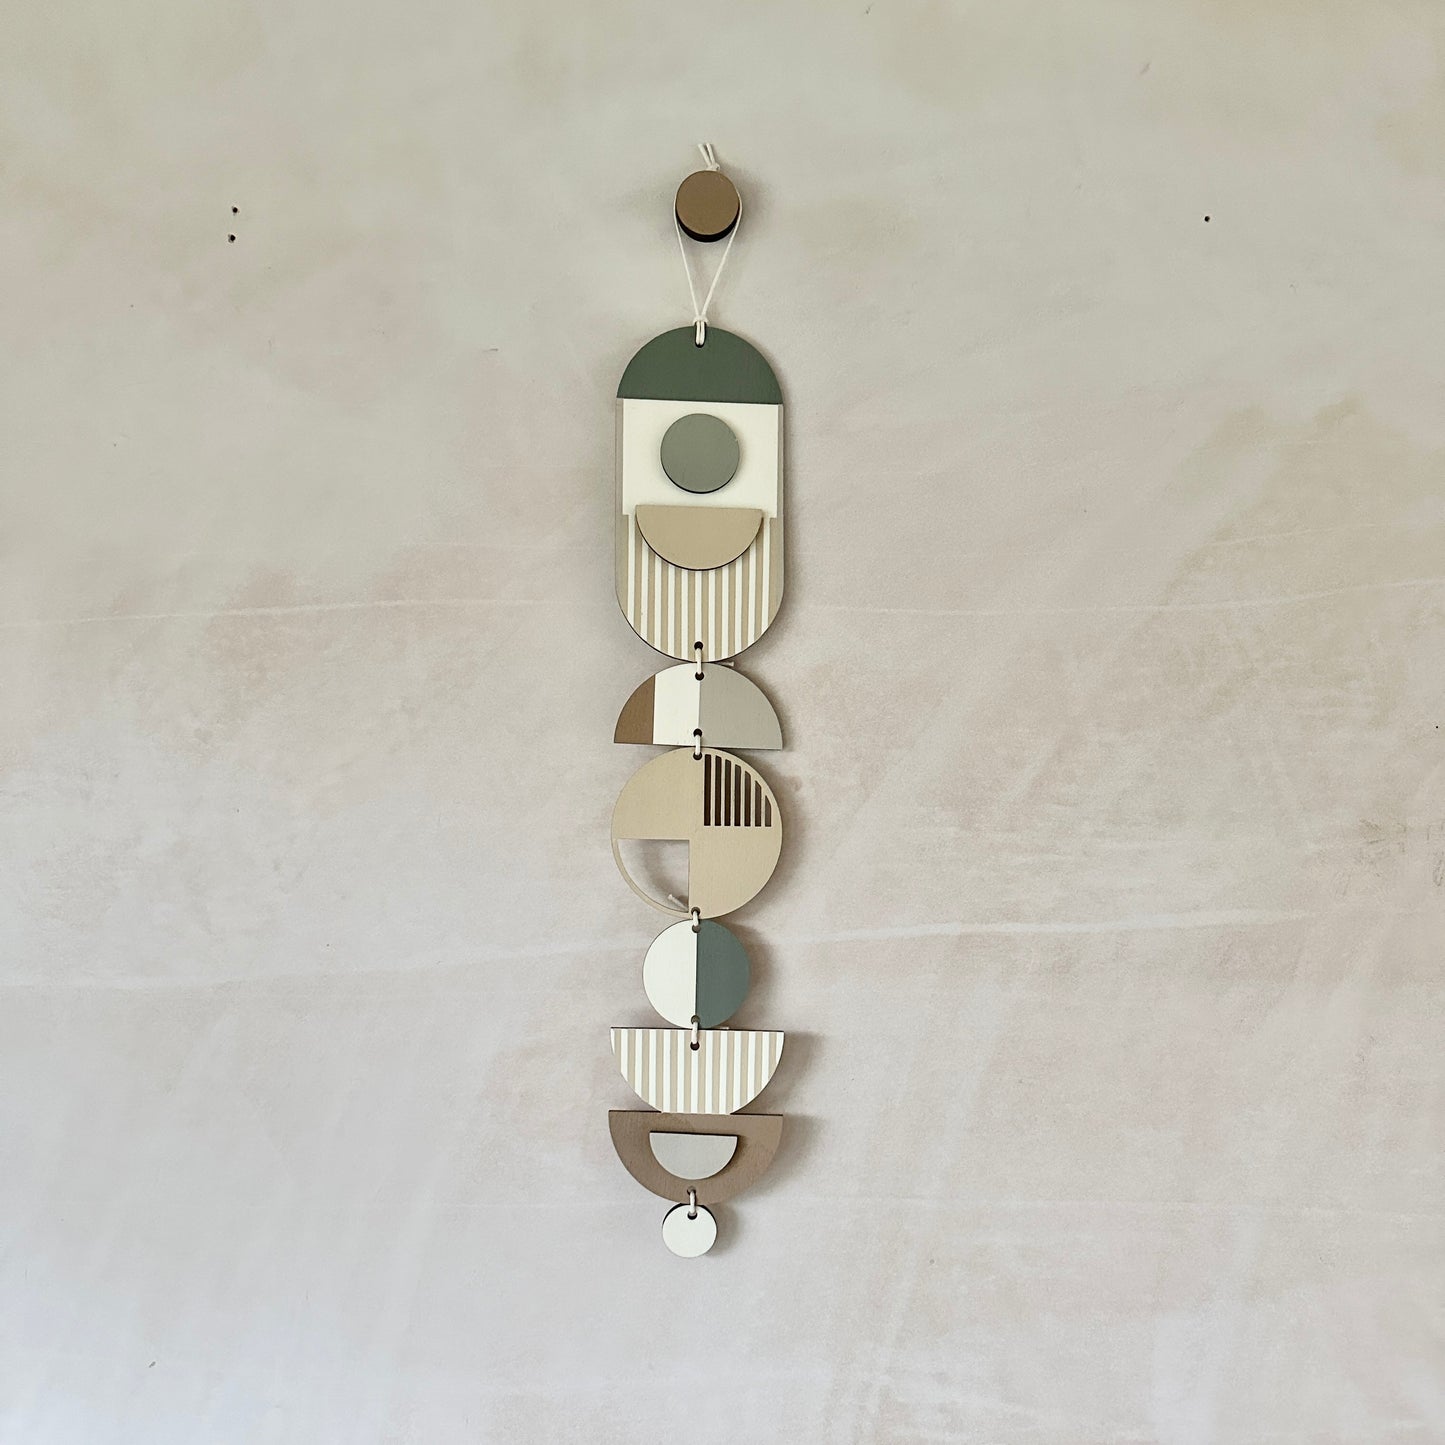 Small Modern Wall Hanging - Natural Geometric Art -  Wood Decor - Unusual Wall Hanging - Wall Jewellery- Contemporary Designs - New Decor